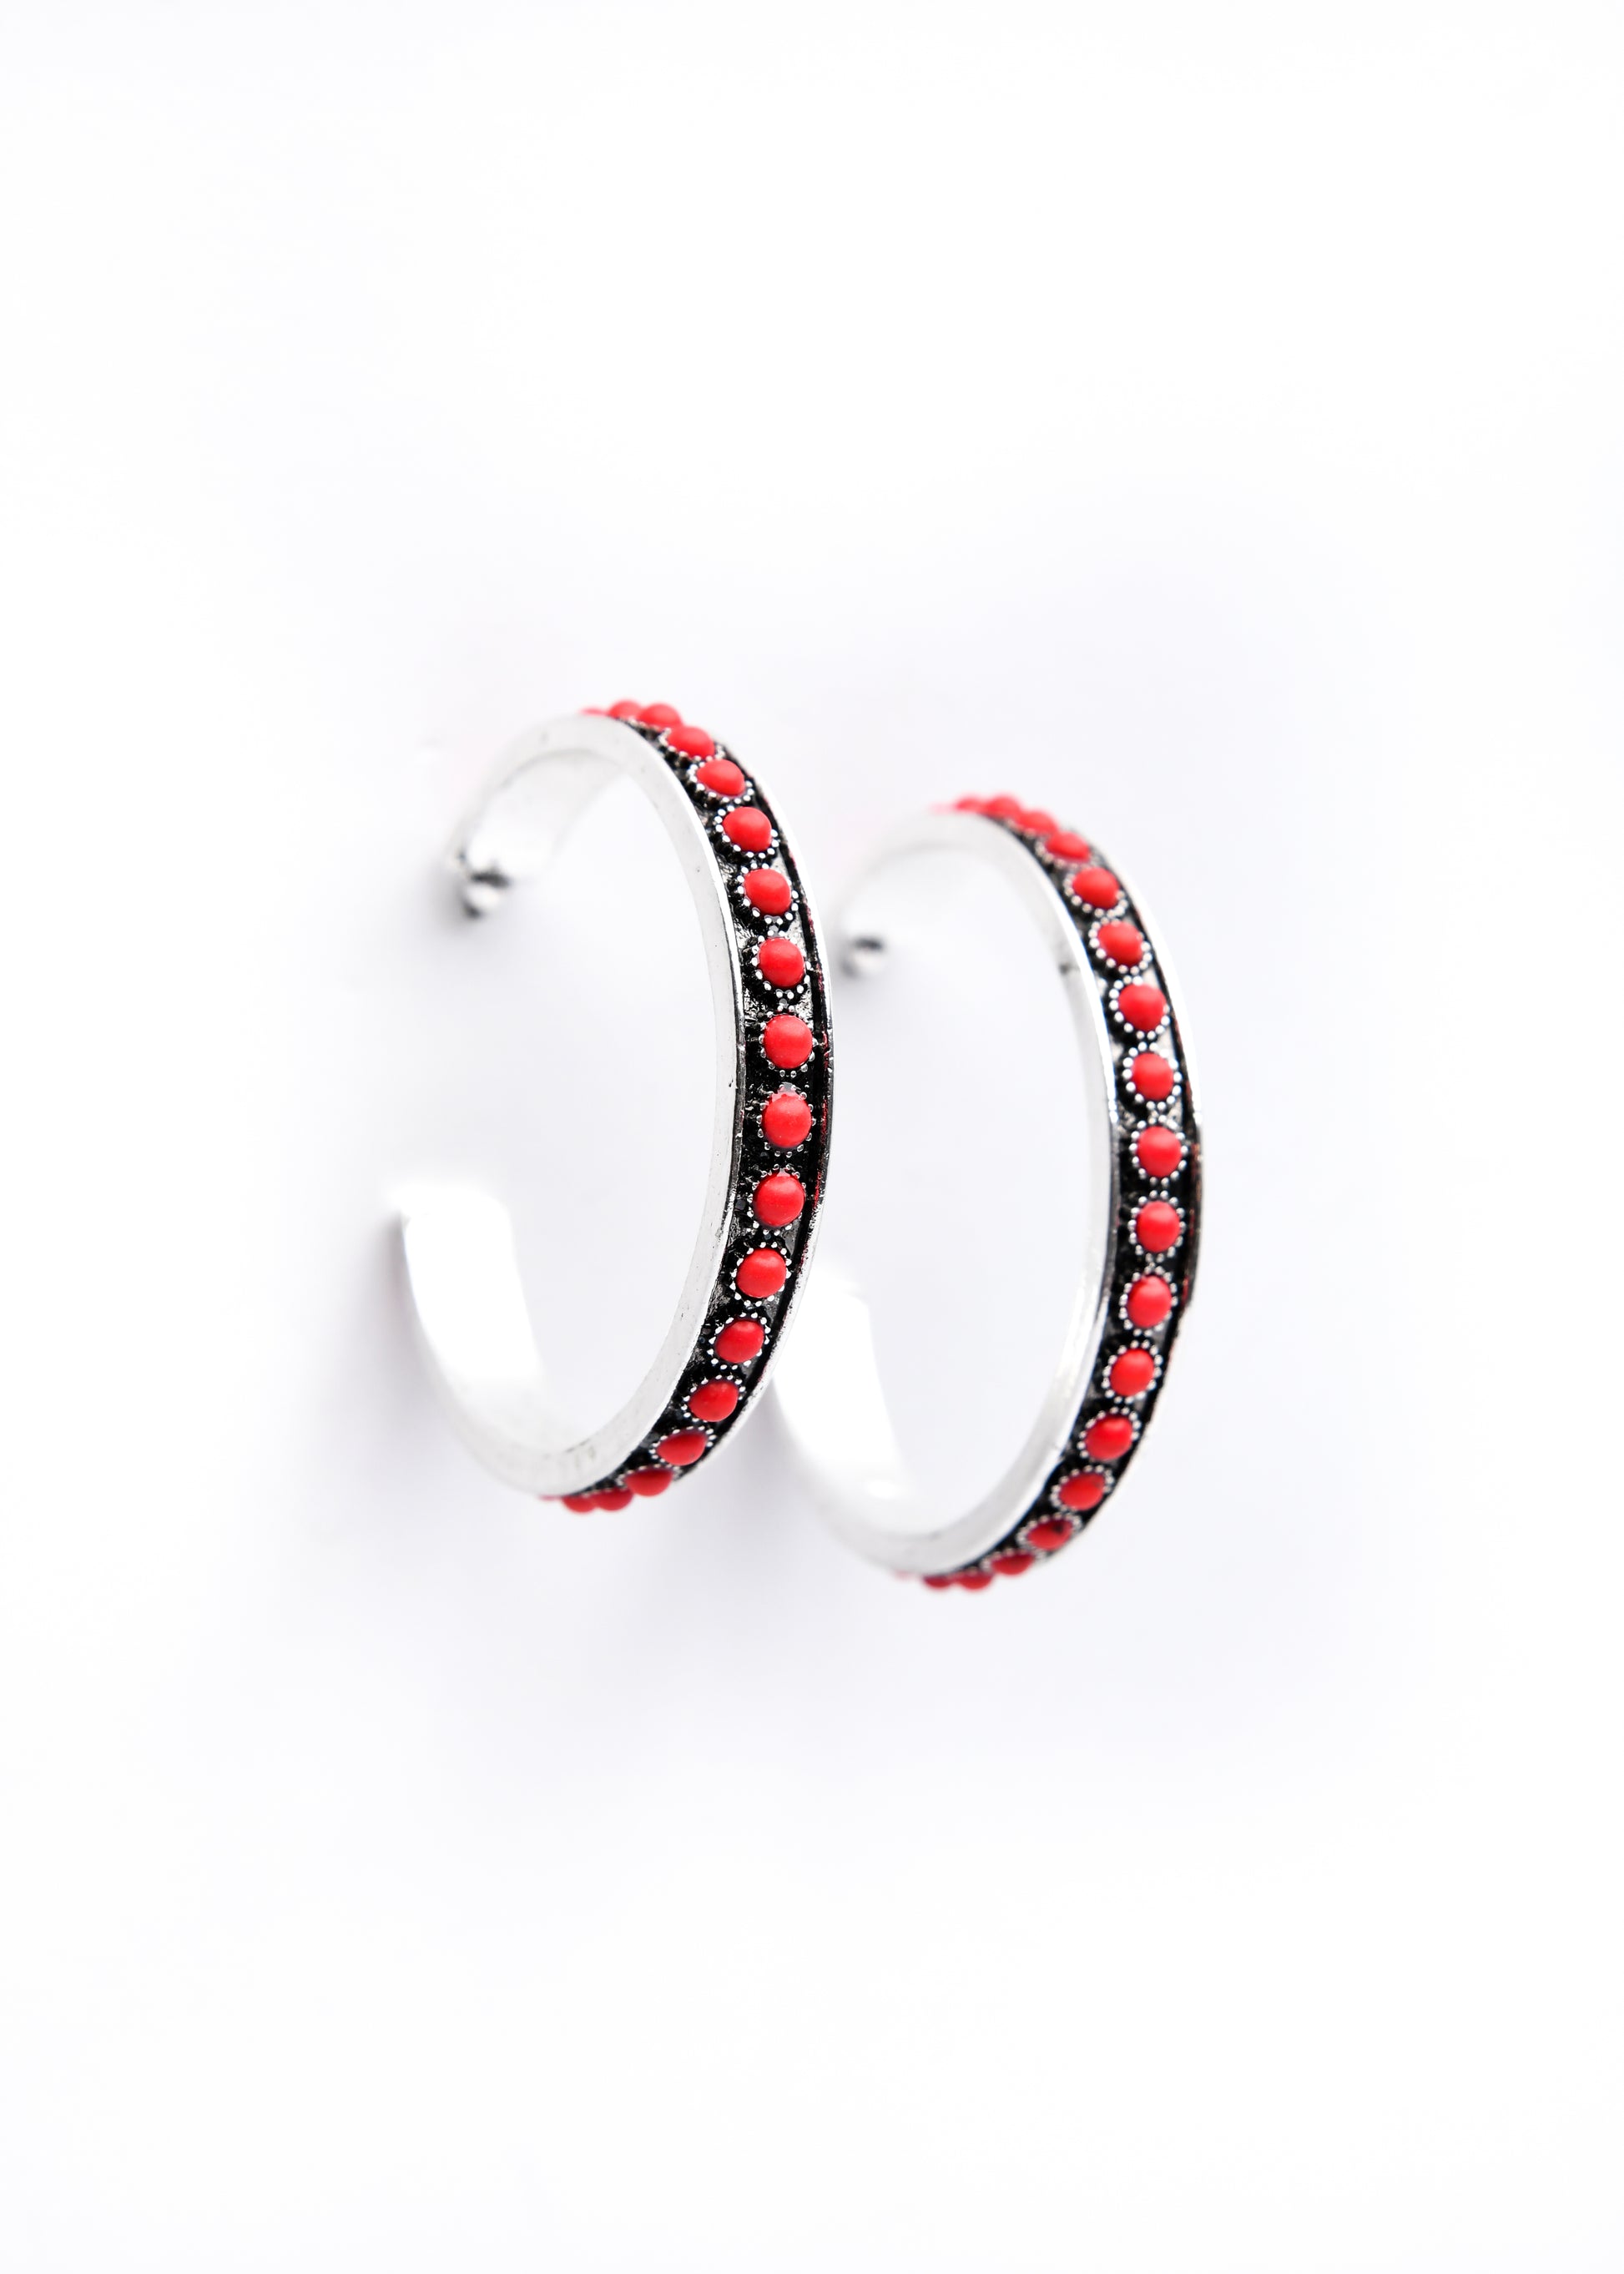 West and Co. Burnished Silver and Red Hoop Earrings-Hoop Earrings-West and Co.--The Twisted Chandelier